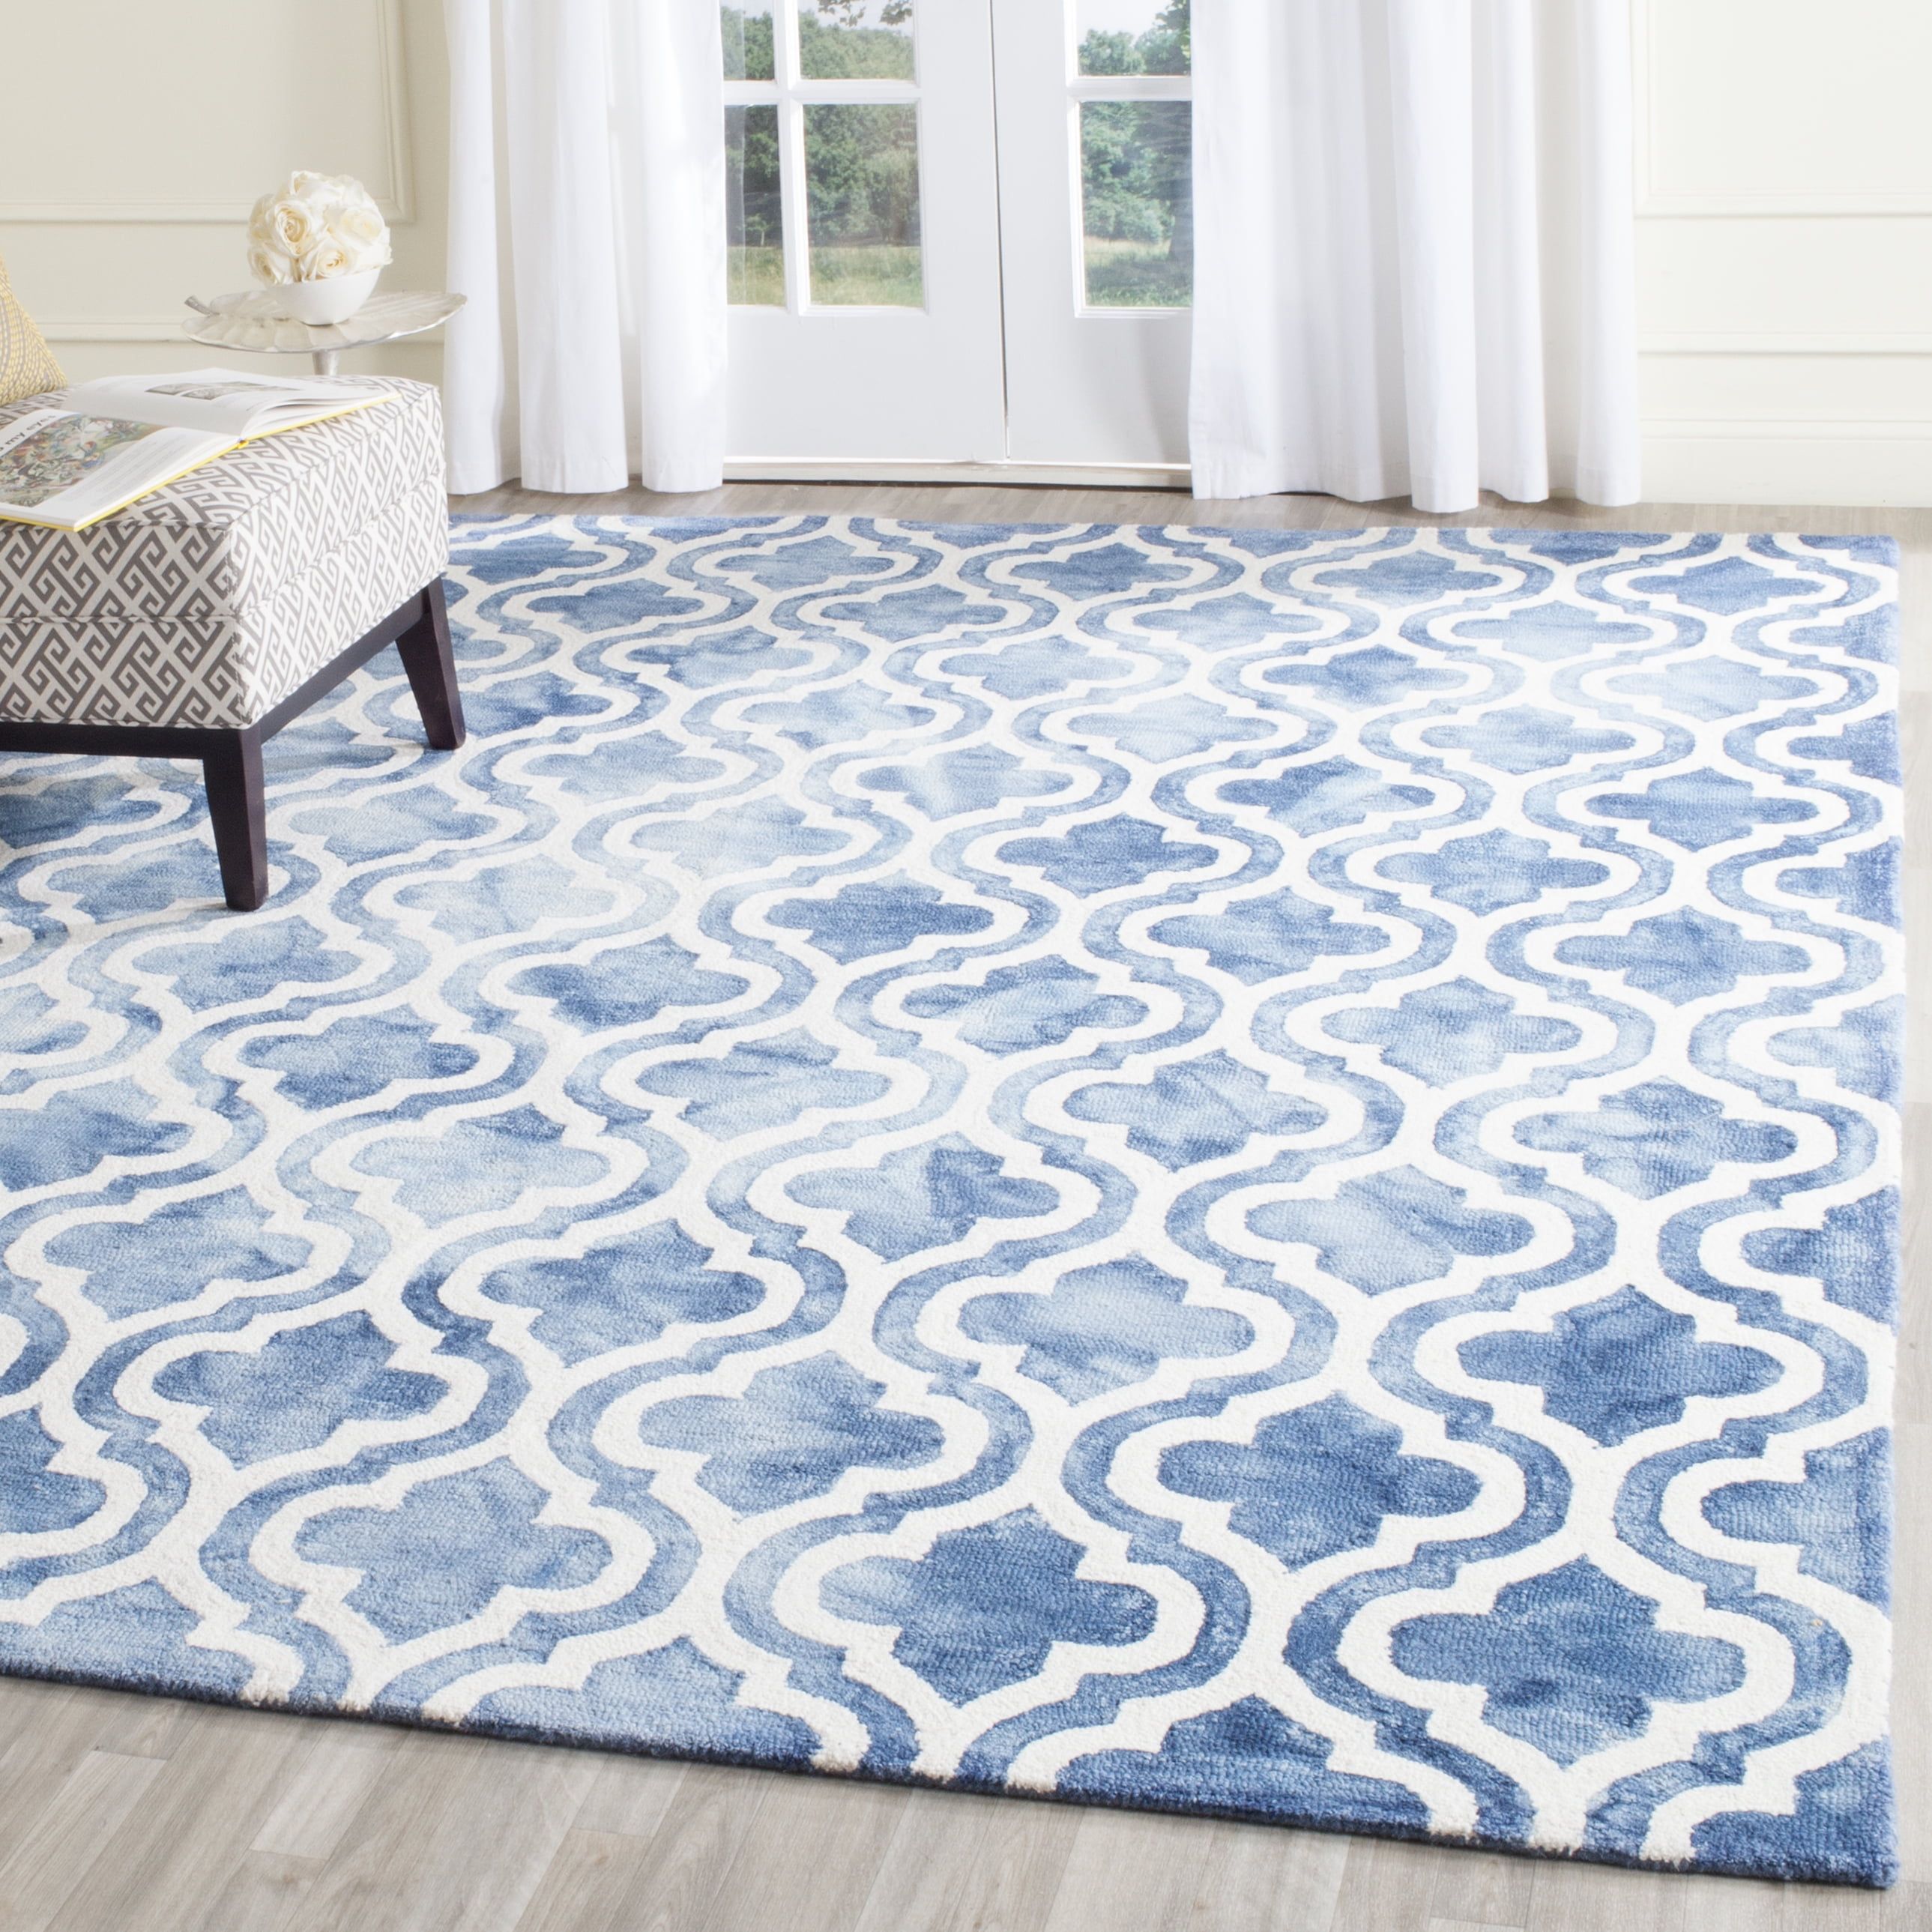 Blue and Ivory Hand-Tufted Wool 9' x 12' Area Rug